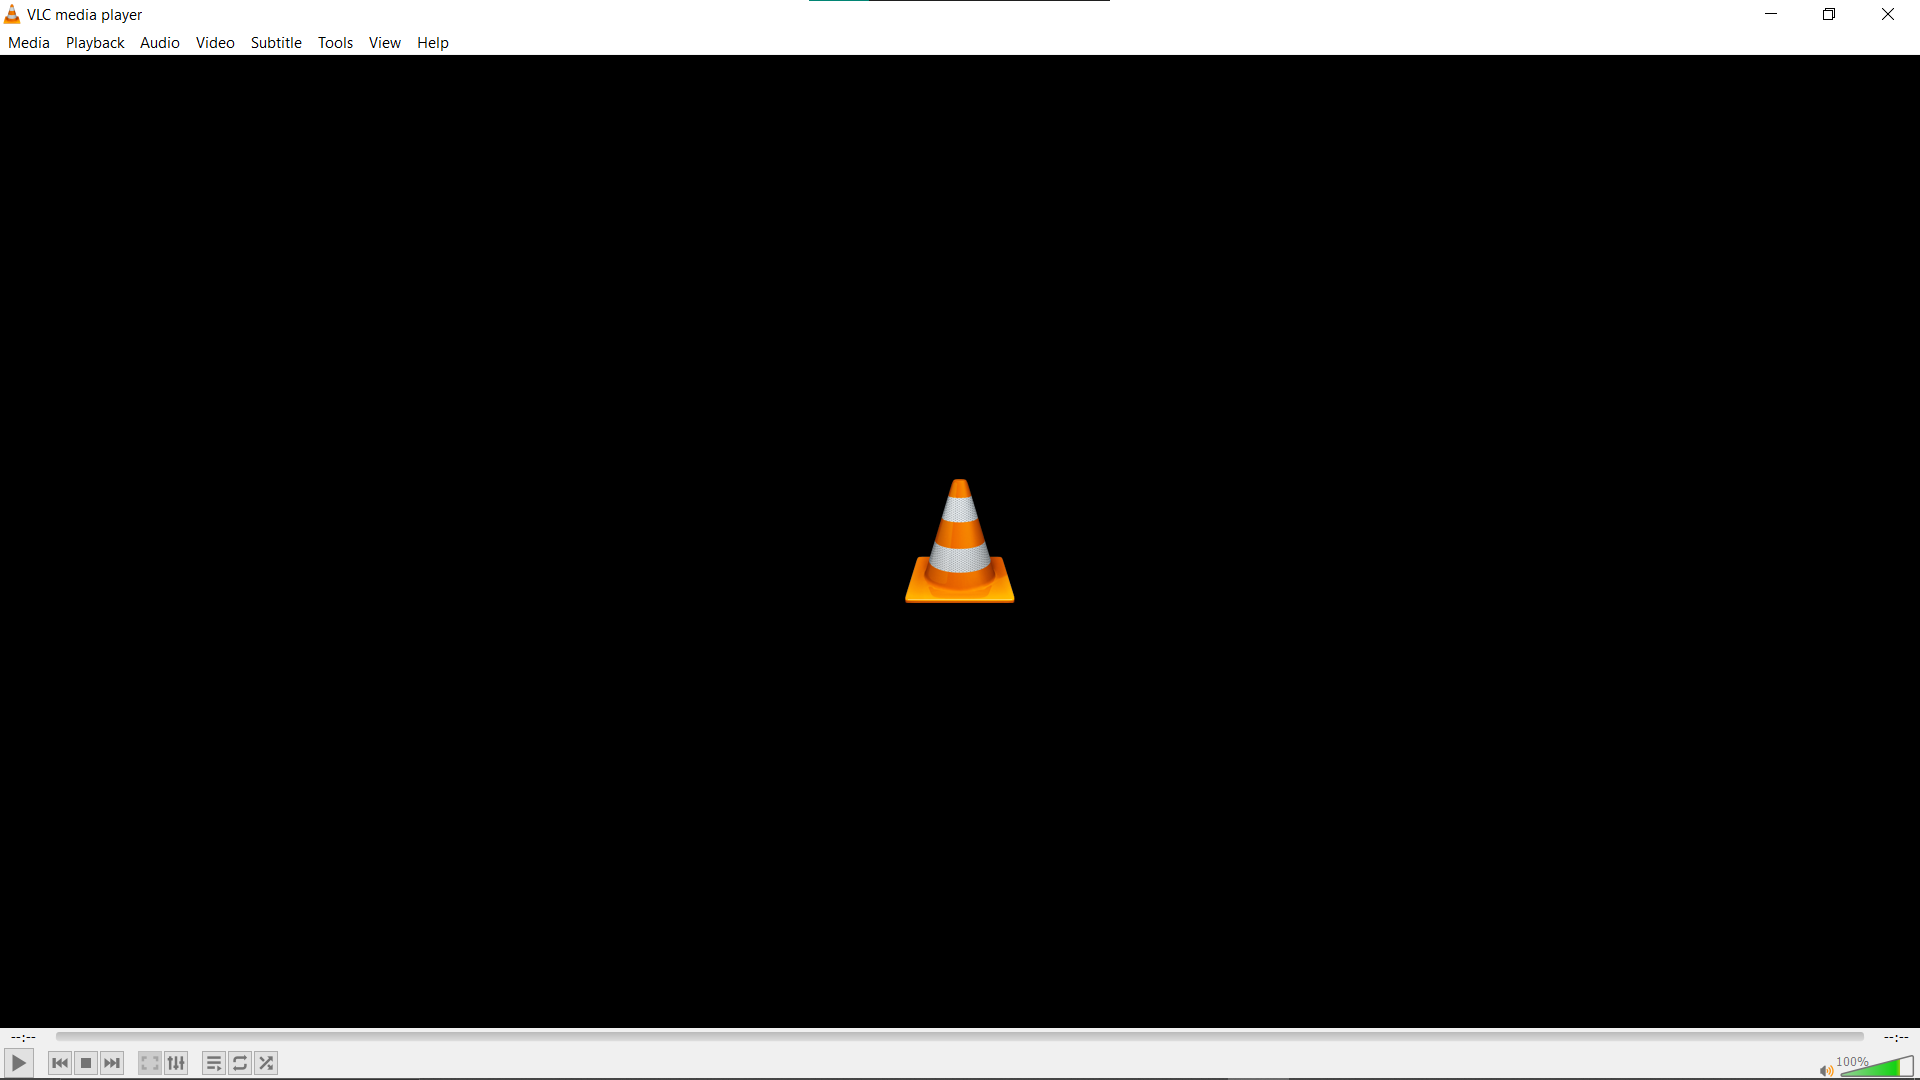 How To Shrink Videos on Windows with VLC: Step 1